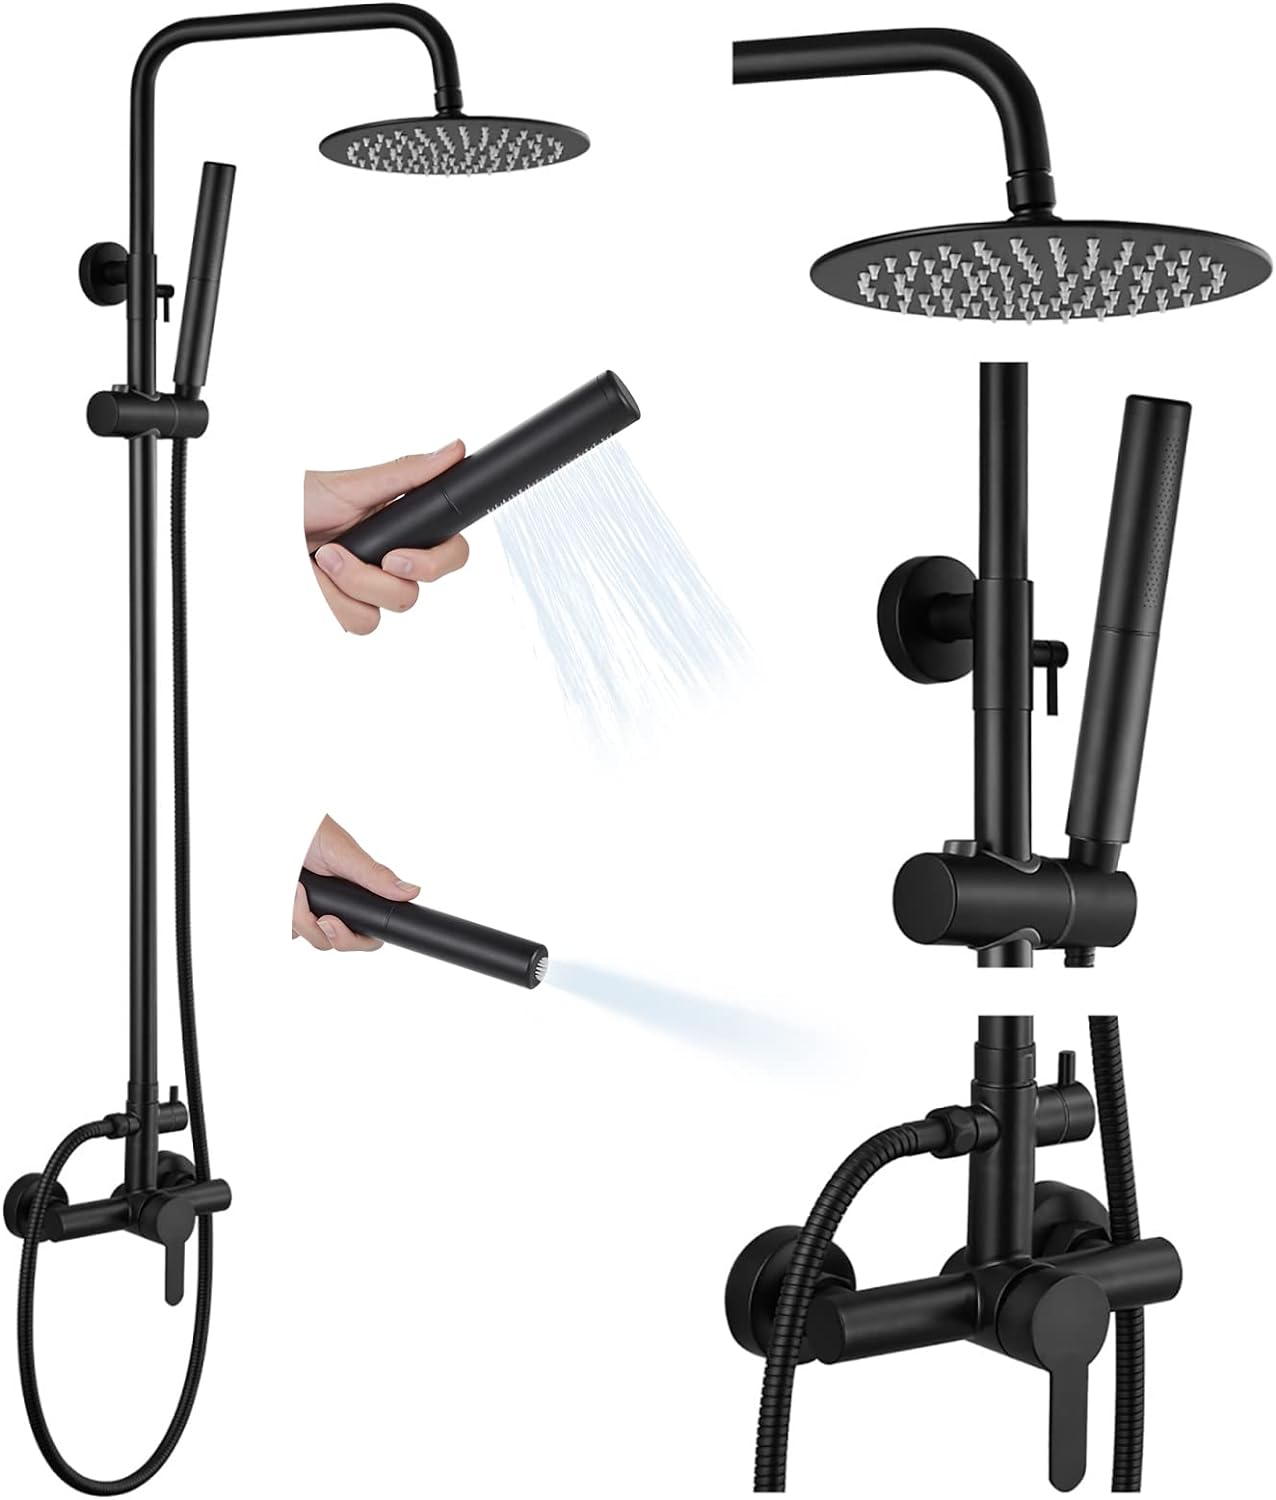 gotonovo Outdoor Shower Faucet Sets Matte Black 304 Stainless Steel Shower Head with 2 in 1 Cylinder Handheld Spray 2 Function Exposed Shower Combo Set Wall Mount Single Handle